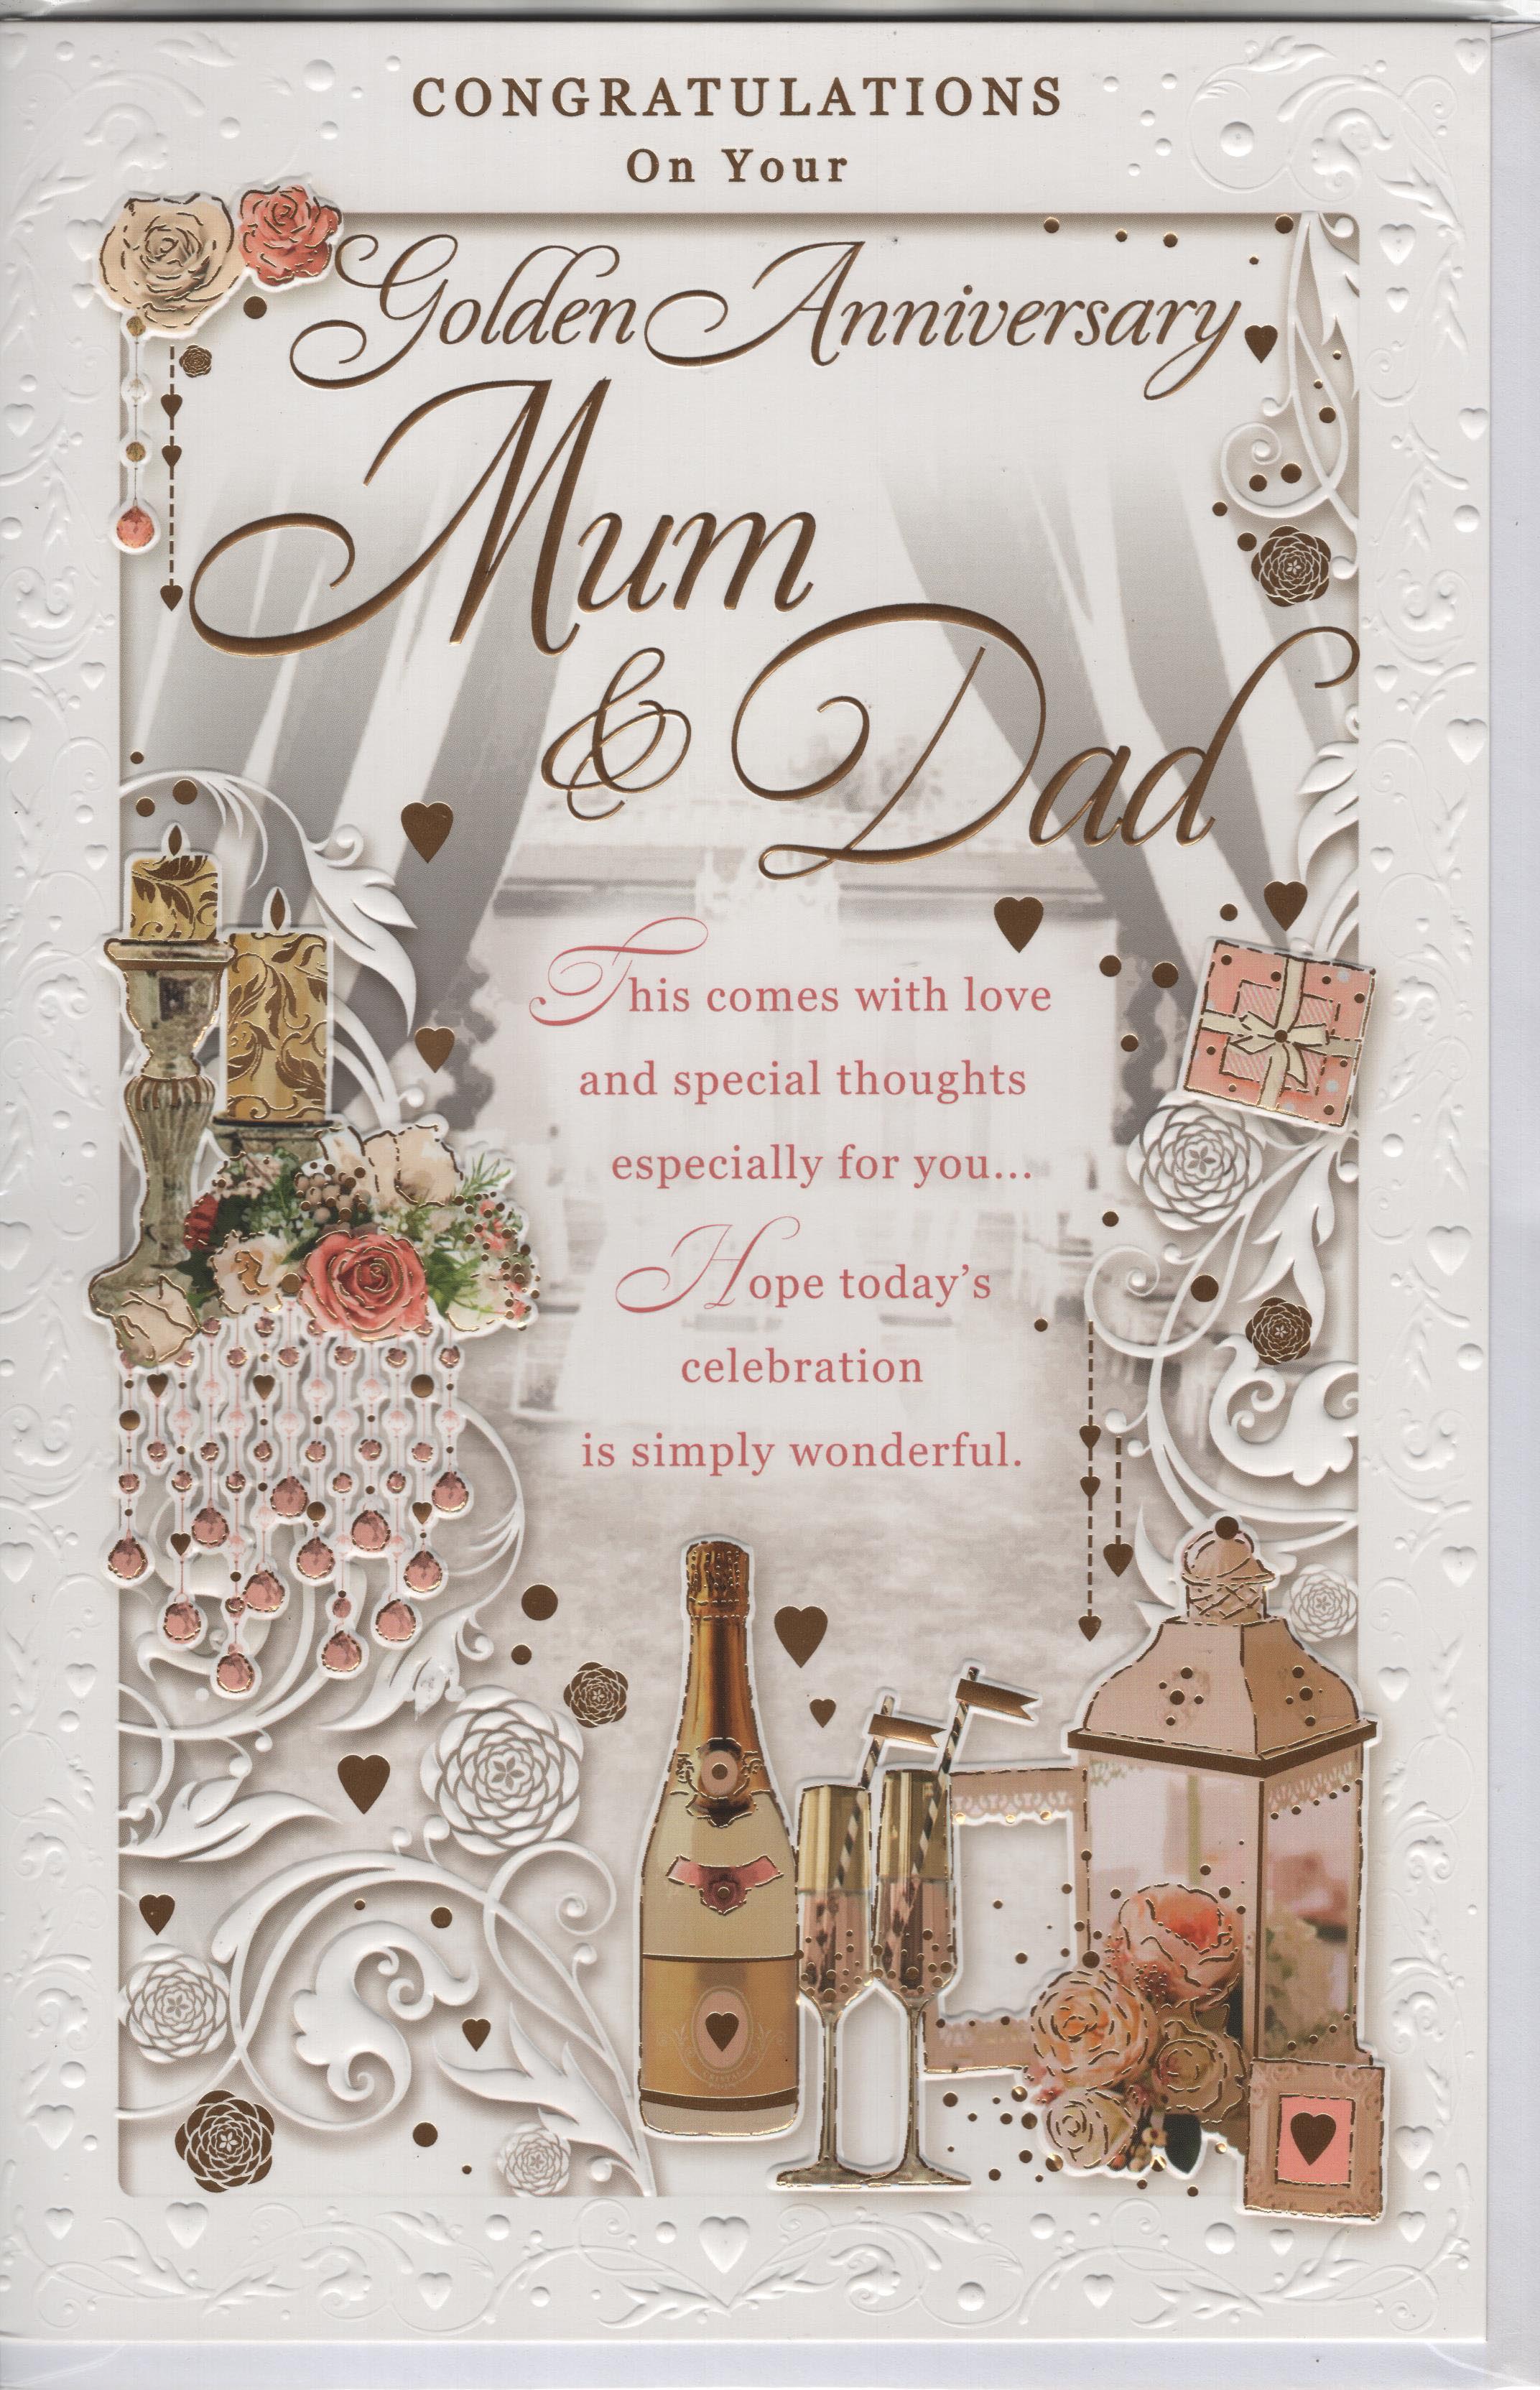 Xpress Yourself Greeting Card ; Congratulations On Your Golden Anniversary Mum and Dad